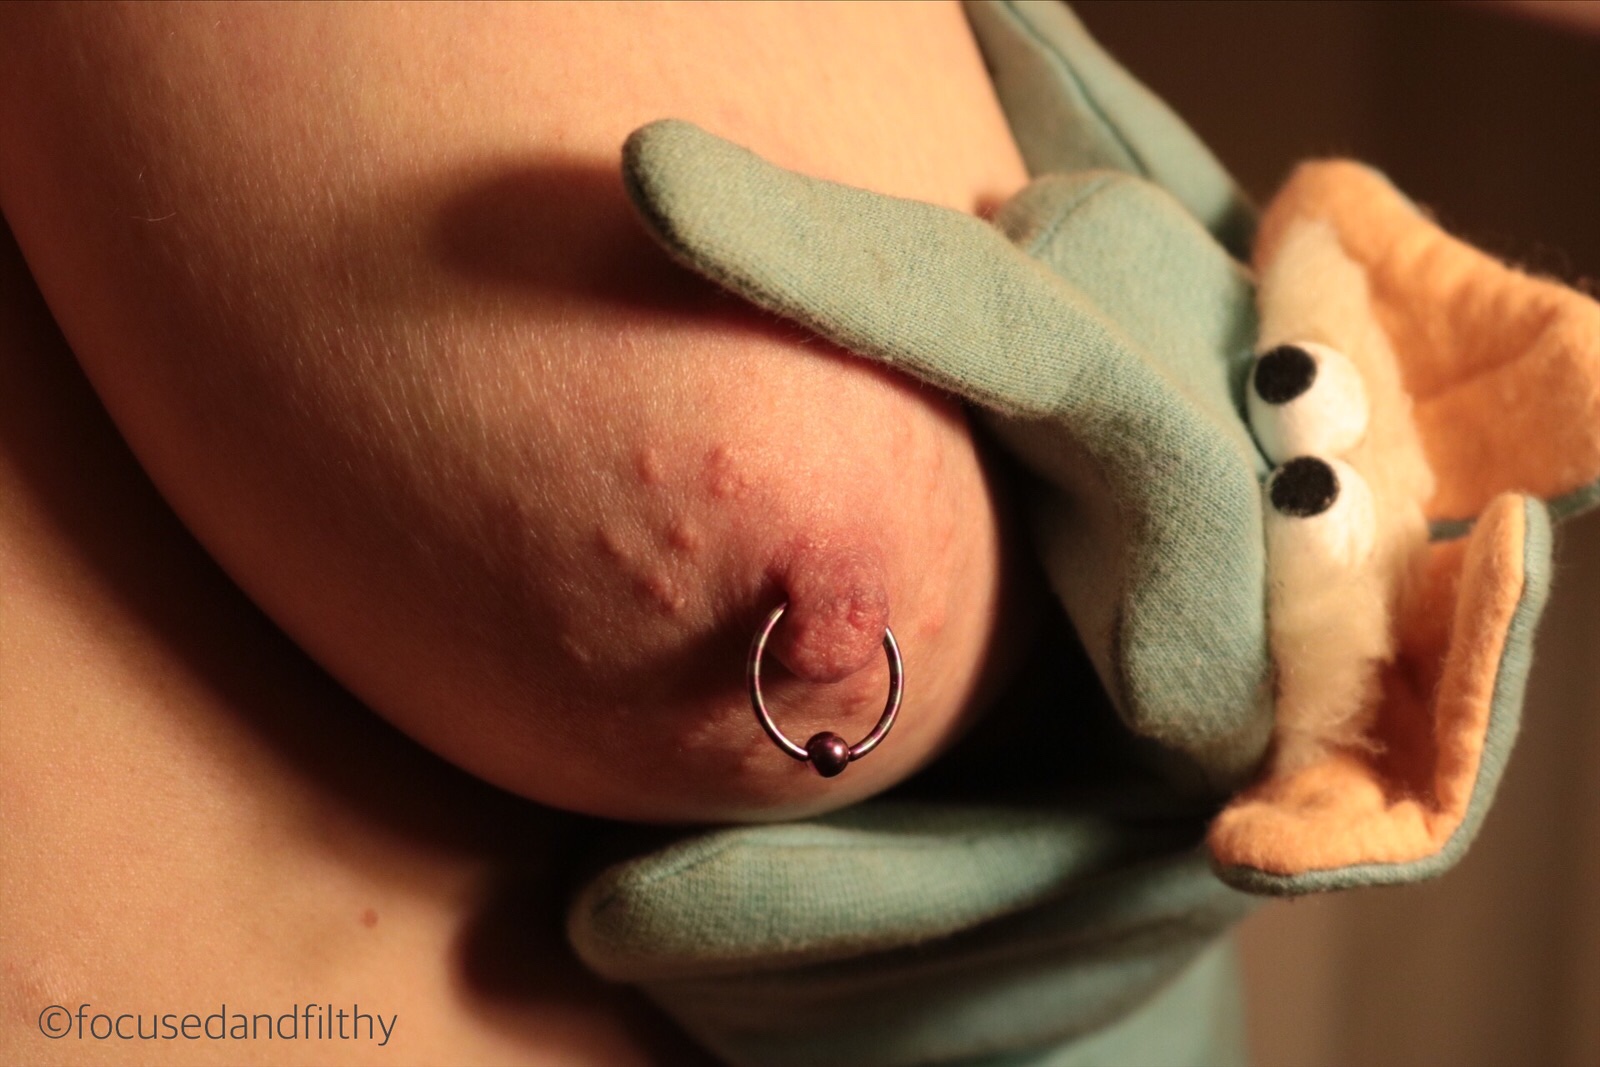 Colour close up photograph of a naked left breast with a pink nipple ring in place and an elephant glove puppet gripping the breast and looking at the jewellery